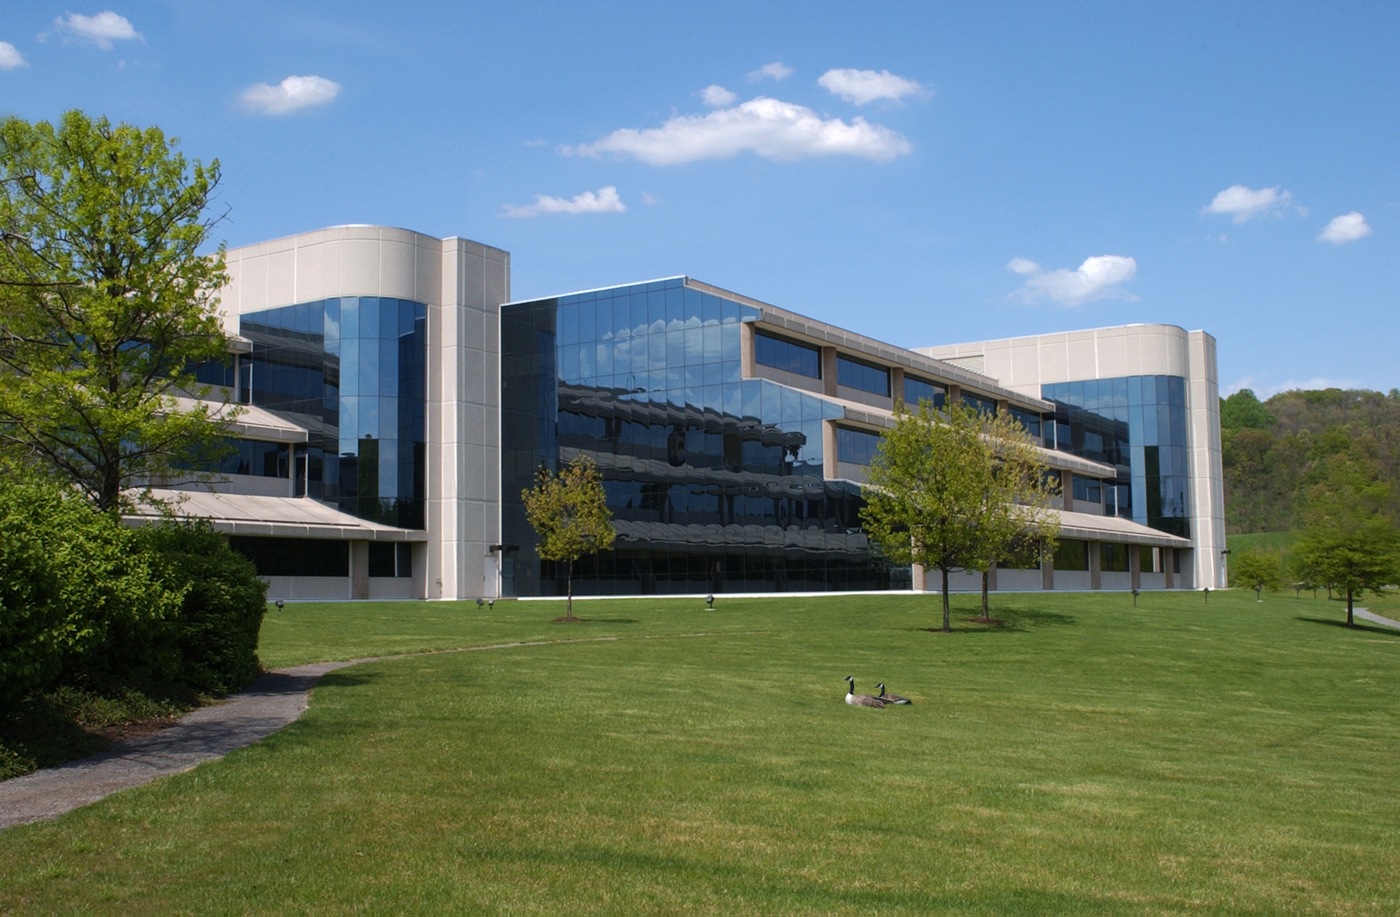 Main facility of the FBI’s Criminal Justice Information Services (CJIS) Division in Clarksburg, West Virginia.